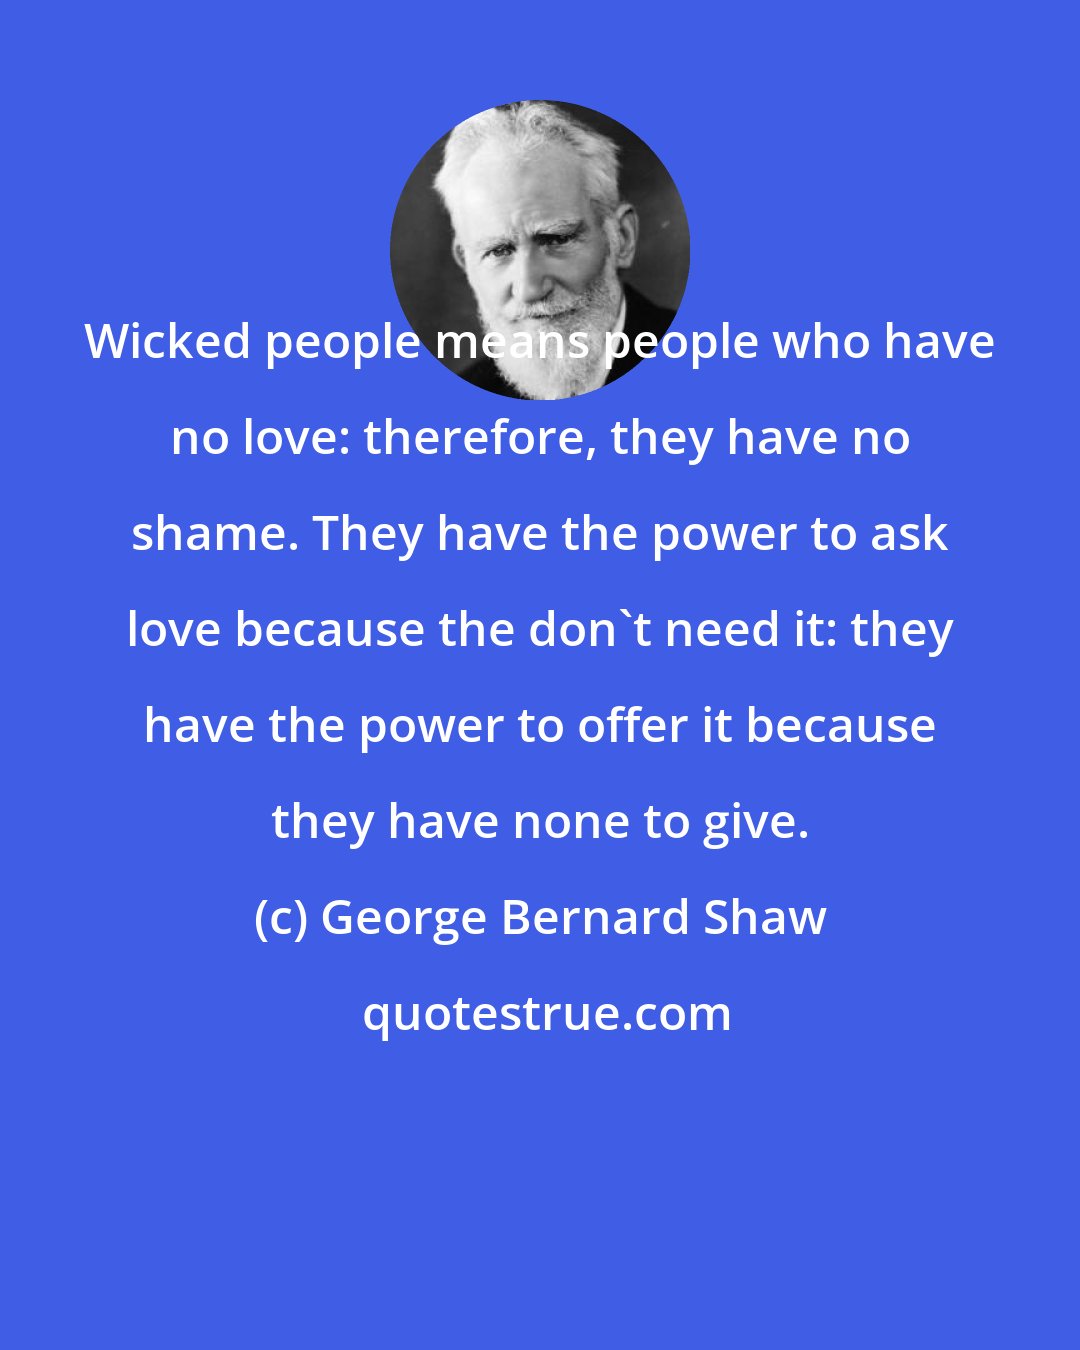 George Bernard Shaw: Wicked people means people who have no love: therefore, they have no shame. They have the power to ask love because the don't need it: they have the power to offer it because they have none to give.